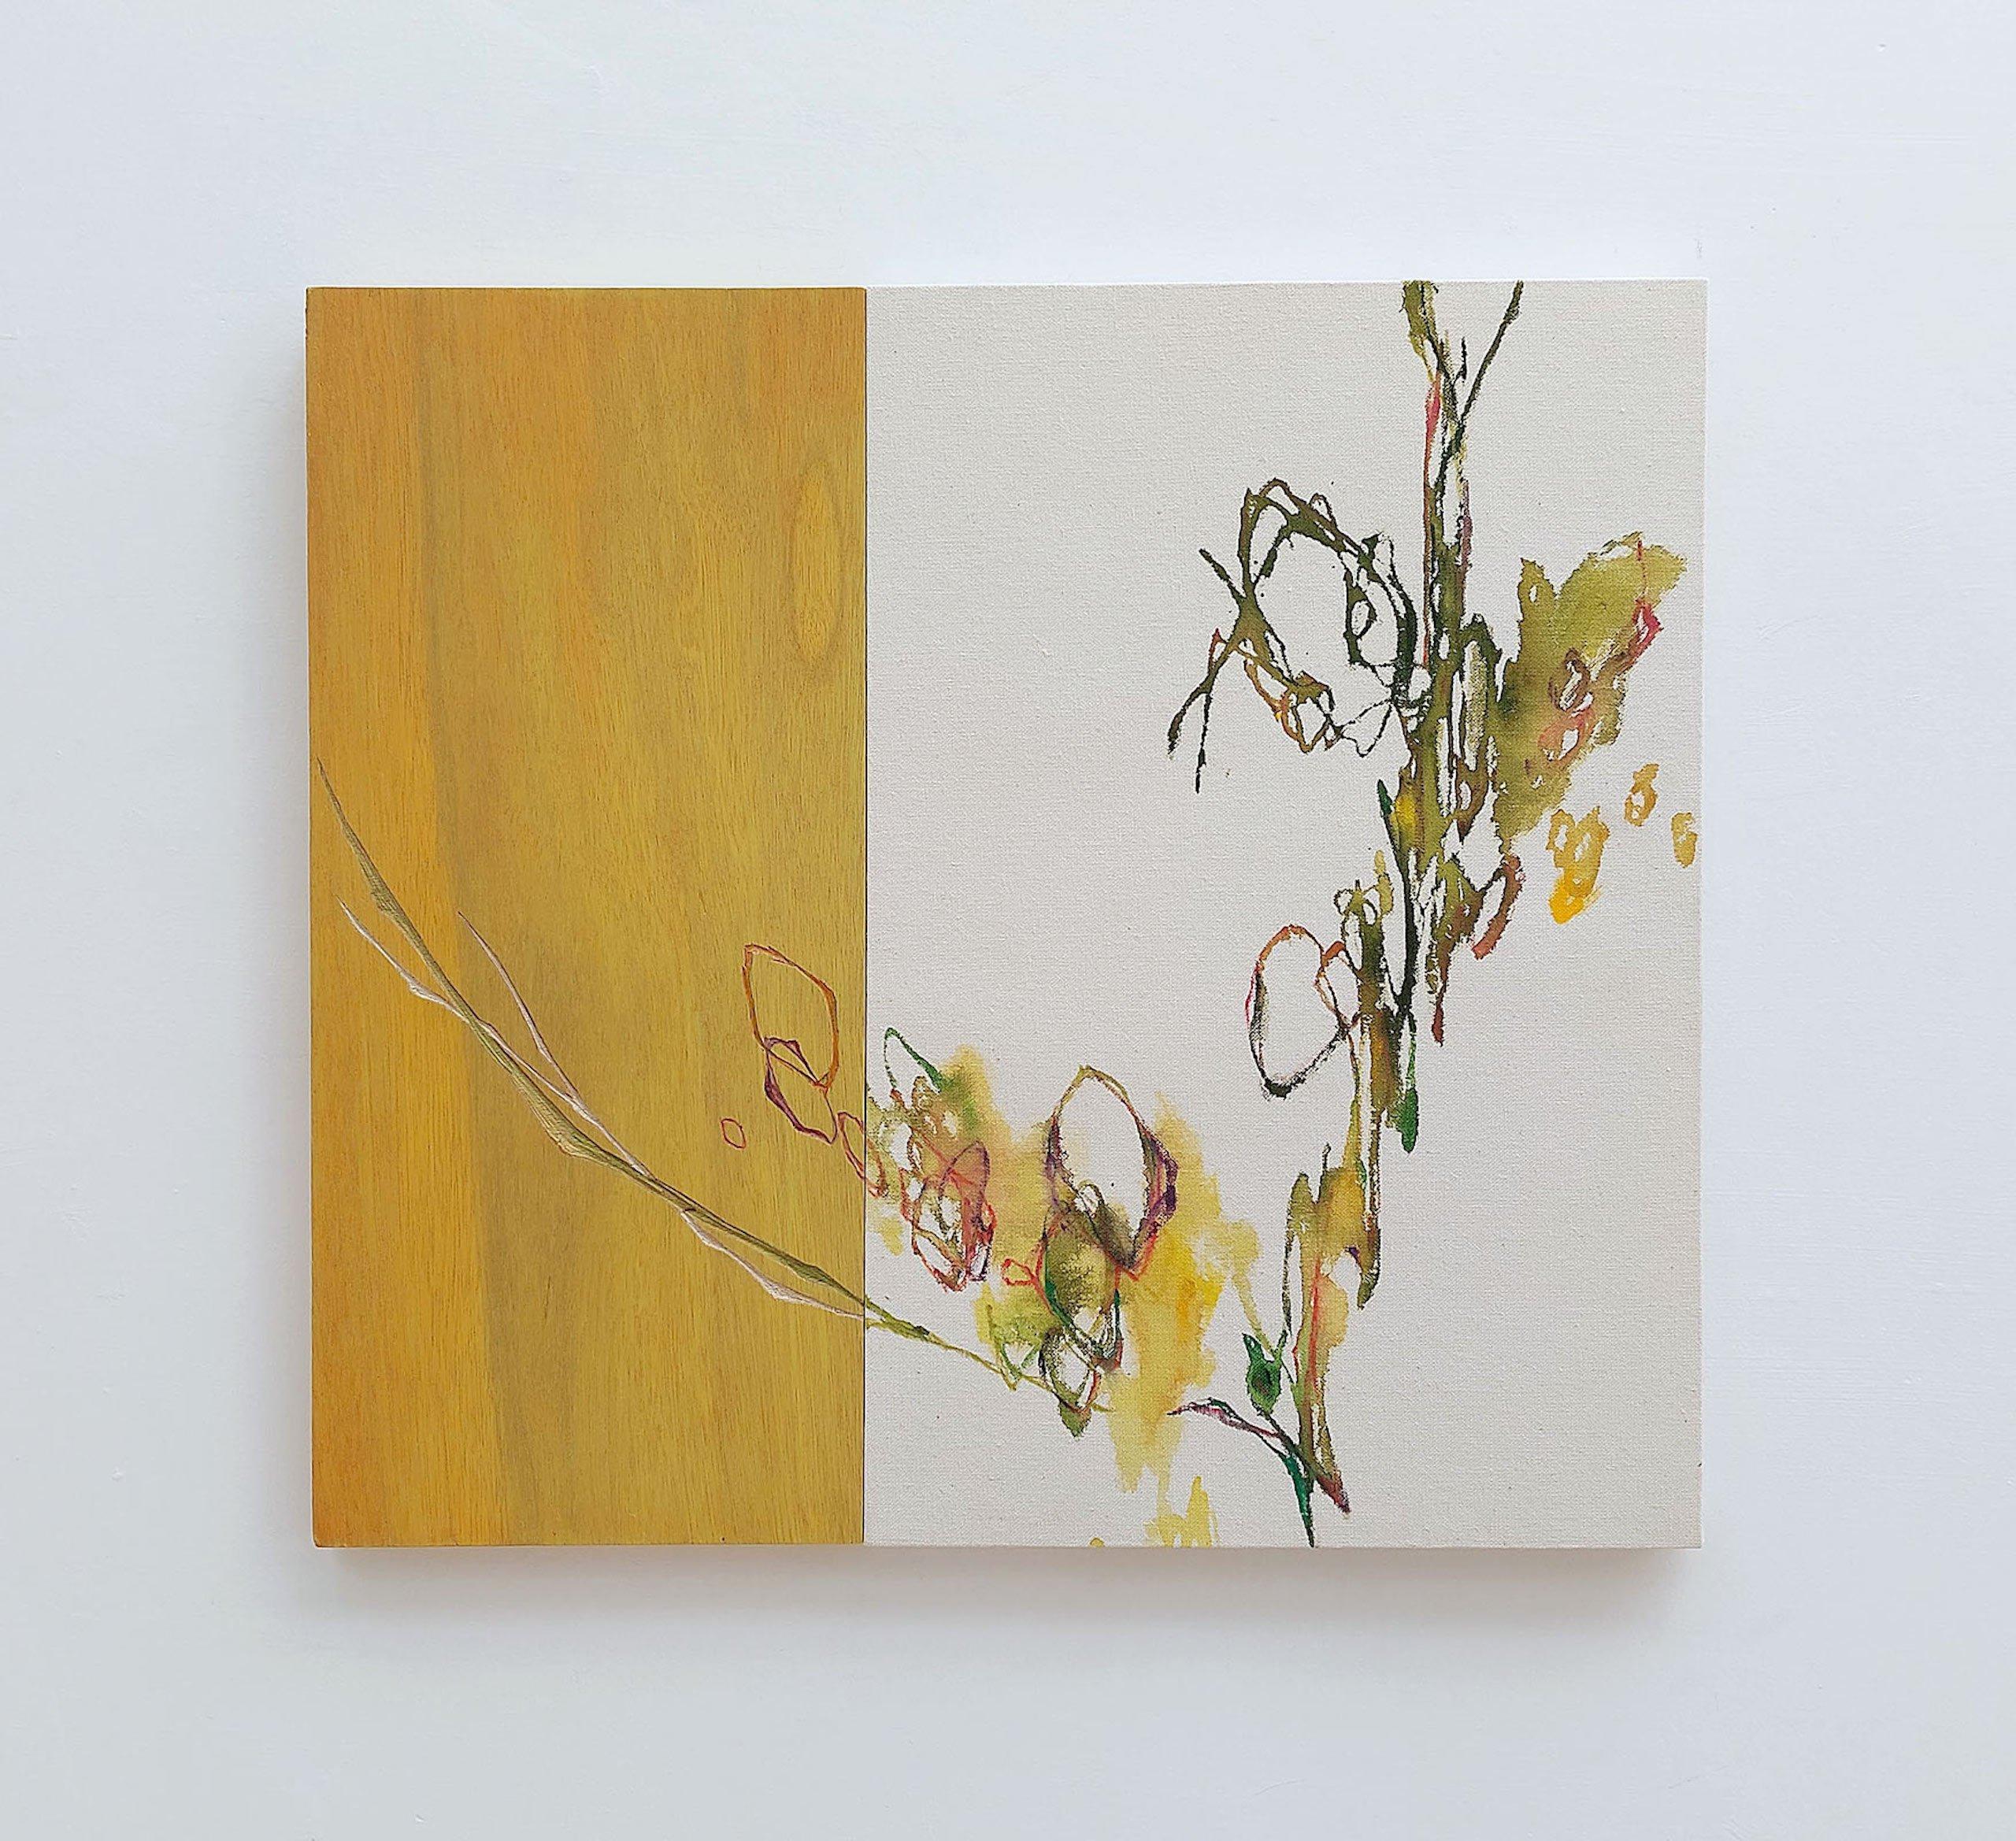 Newborn sound #83 by Maho Maeda - acrylic, pencil, ink and carved wood - yellow